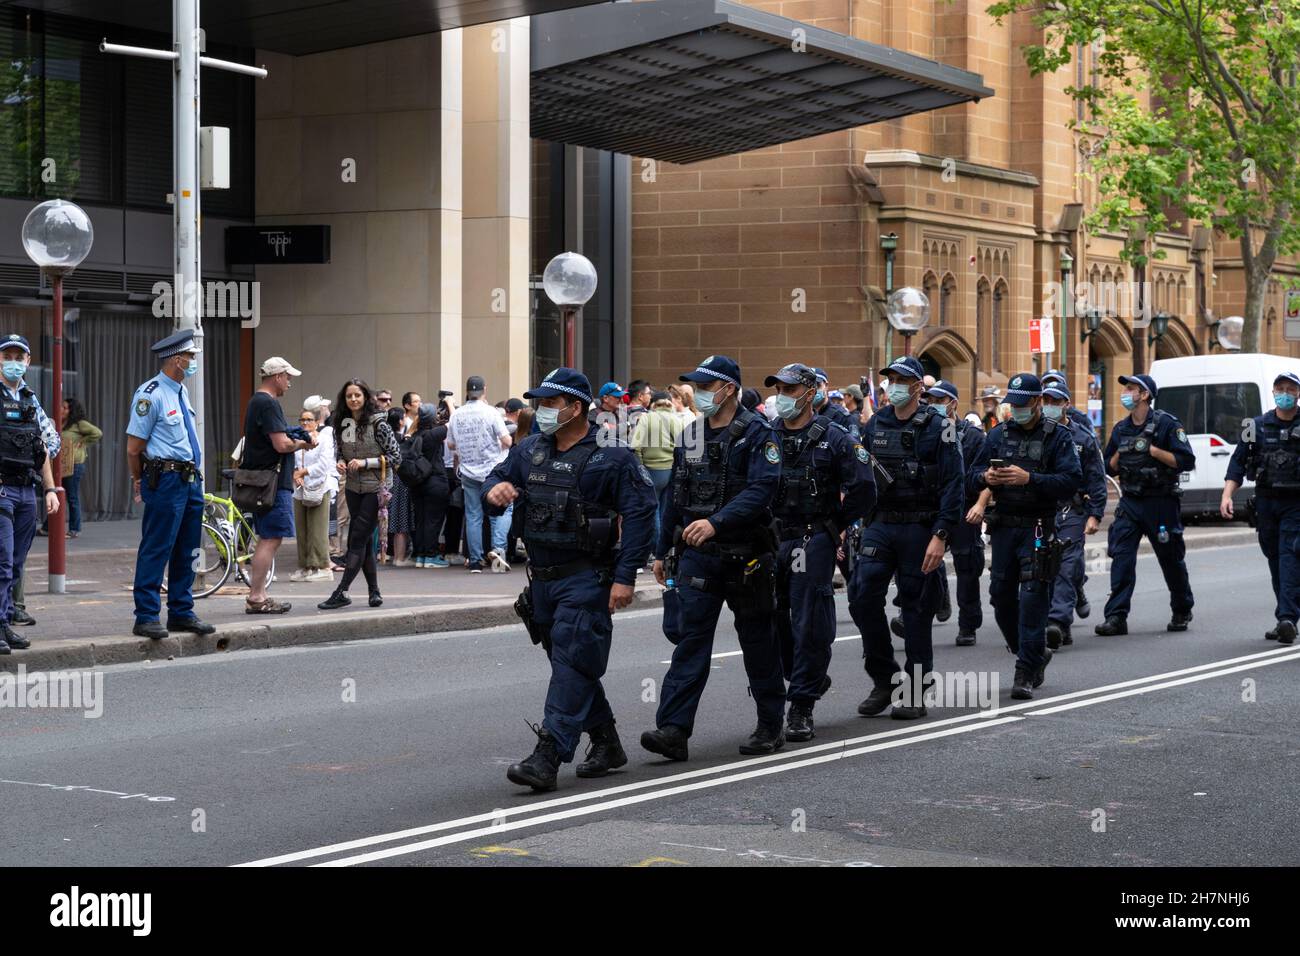 Several police officers and constables can be seen walking on the street in Sydney, Australia. at protest against government vaccine mandates. Stock Photo